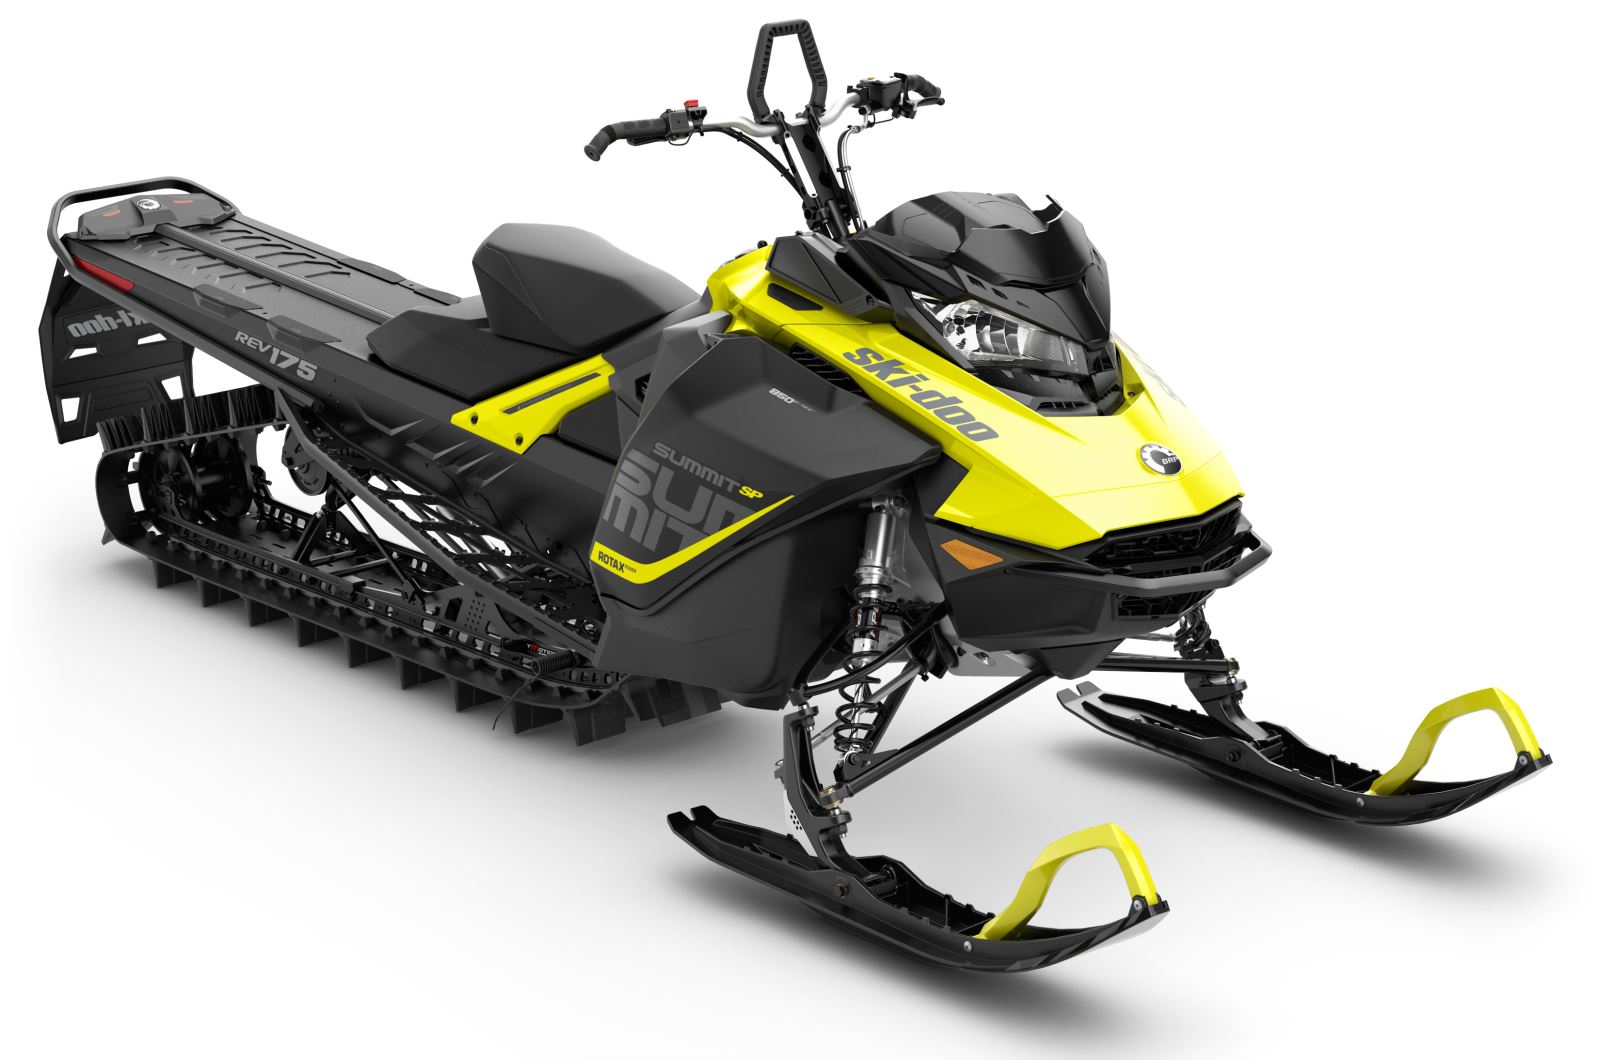 2018 Ski Doo 175 Summit Joins The 850 Family Snowest for How To Ski Doo